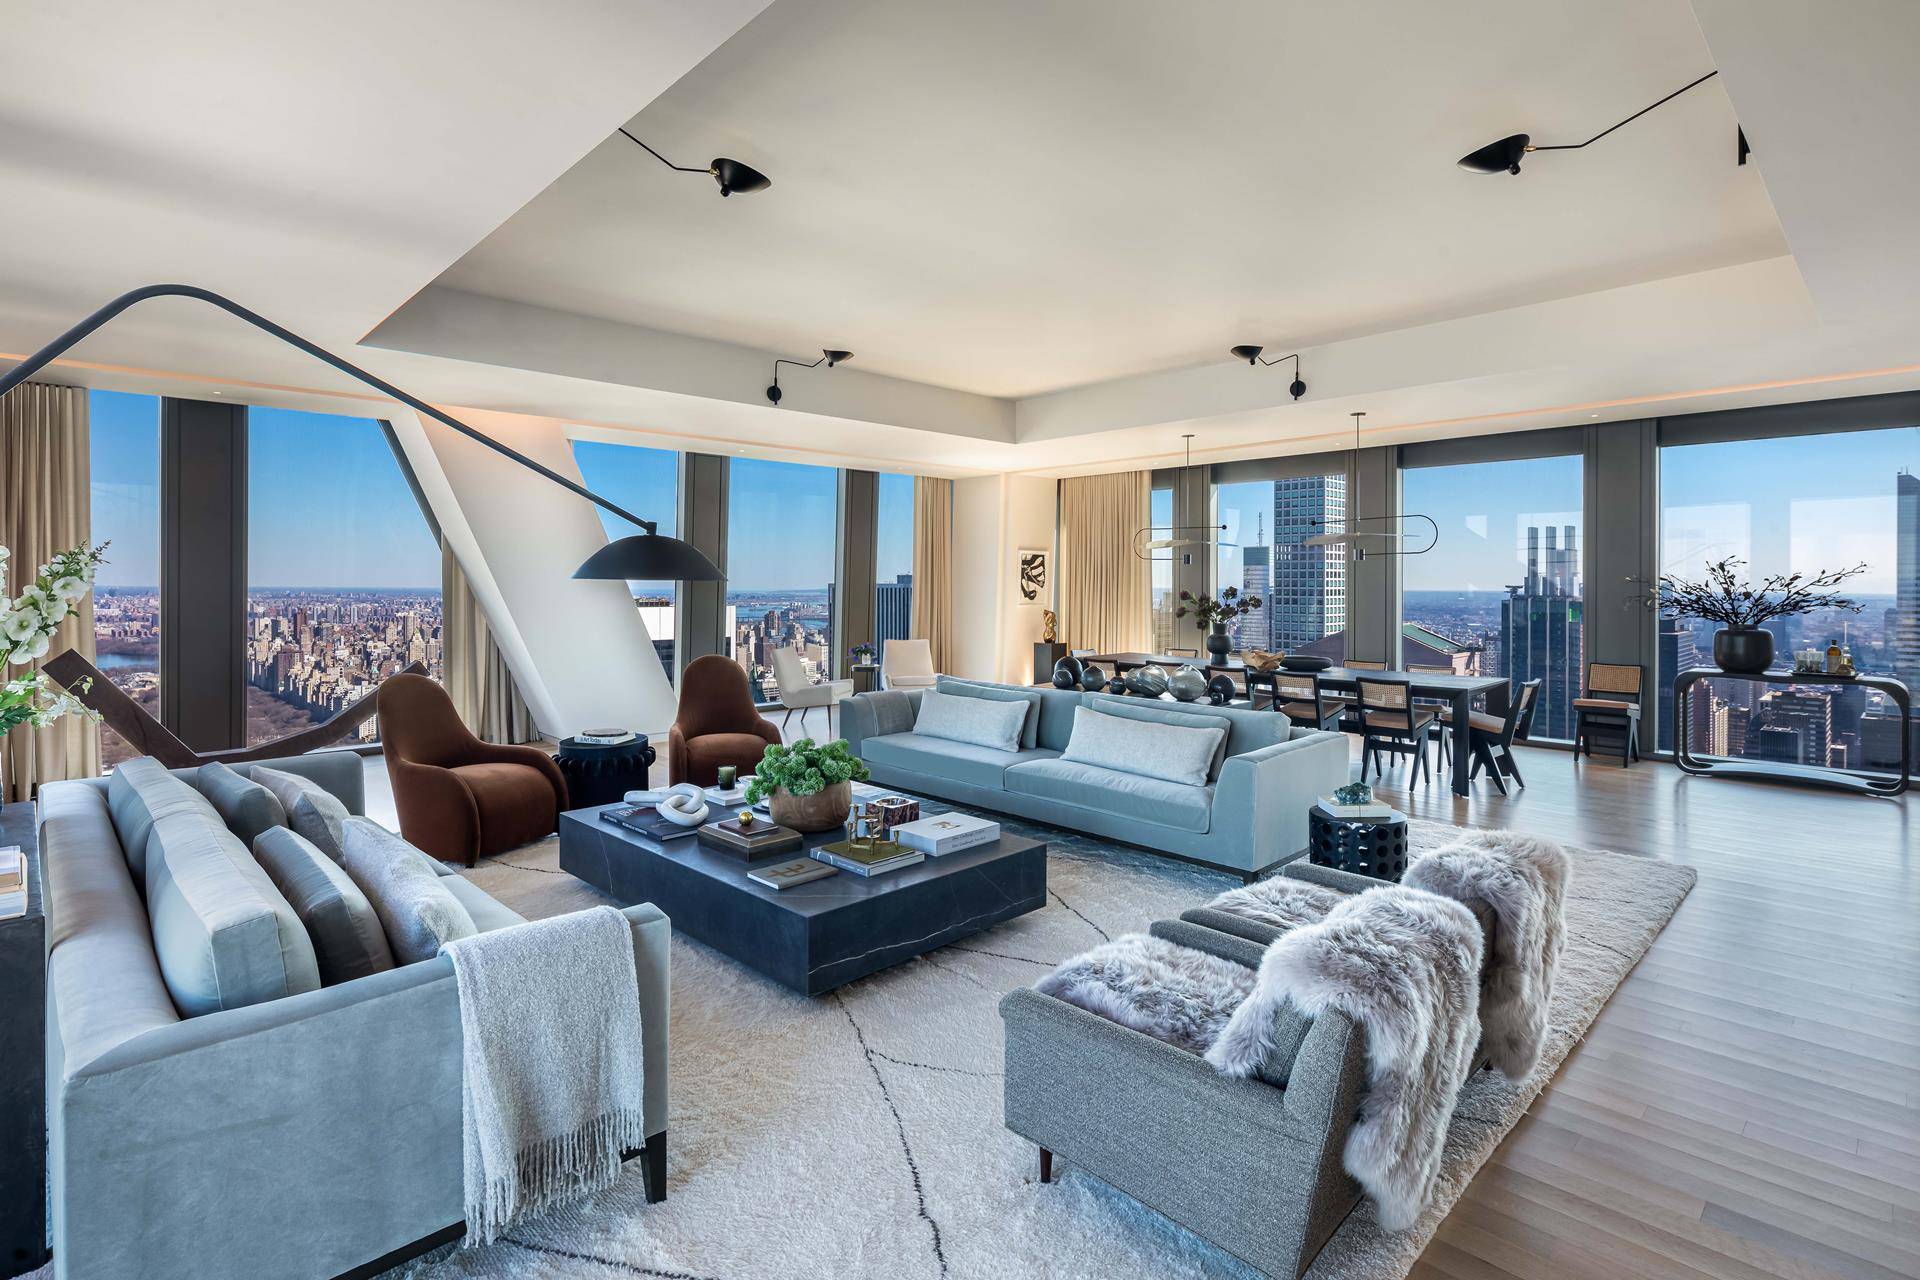 Floating atop New York's iconic skyline and comprising the entire 71st floor of 53 West 53, this exquisite residence offers majestic scale with three bedrooms, four and a half bathrooms, ...